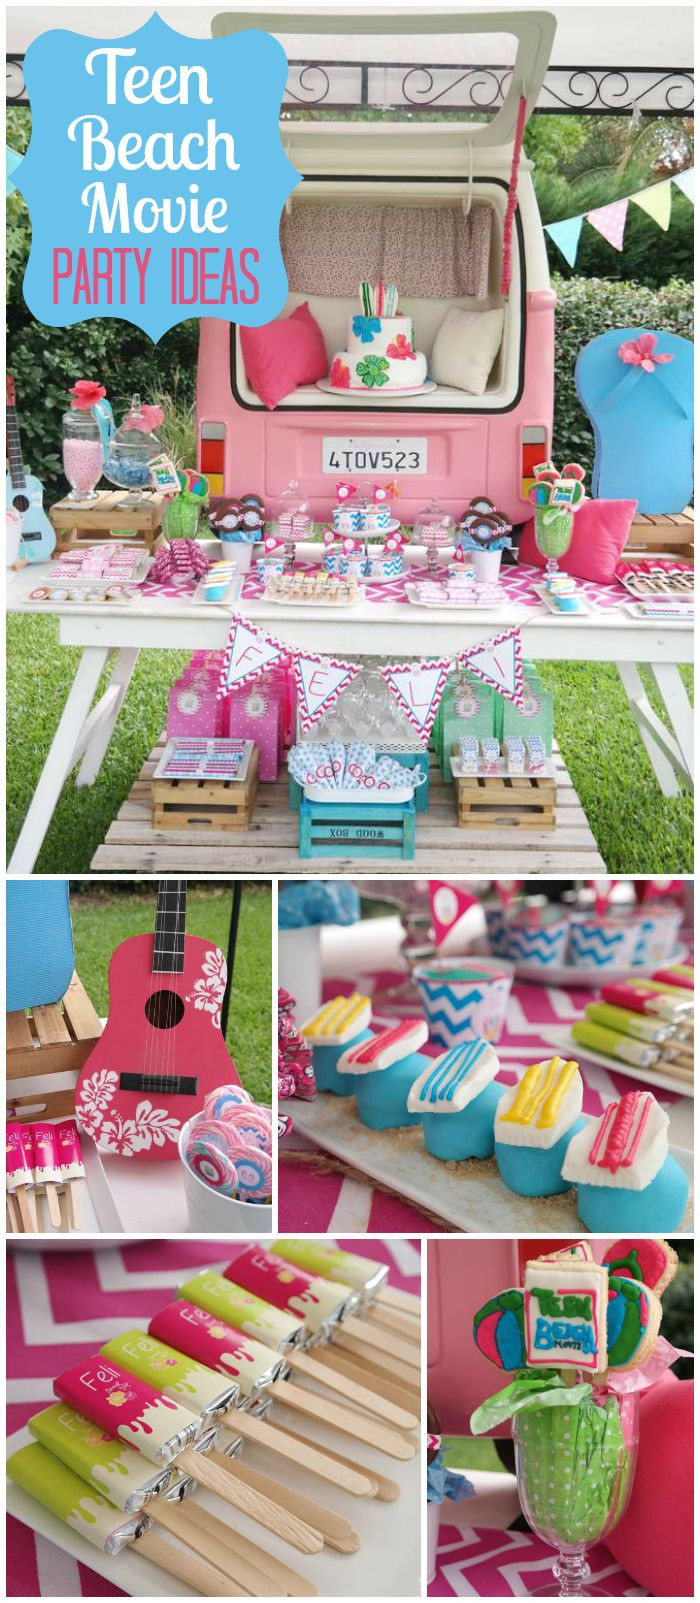 Summer Teenage Party Ideas
 Pin on Girl Birthday Party Ideas & Themes